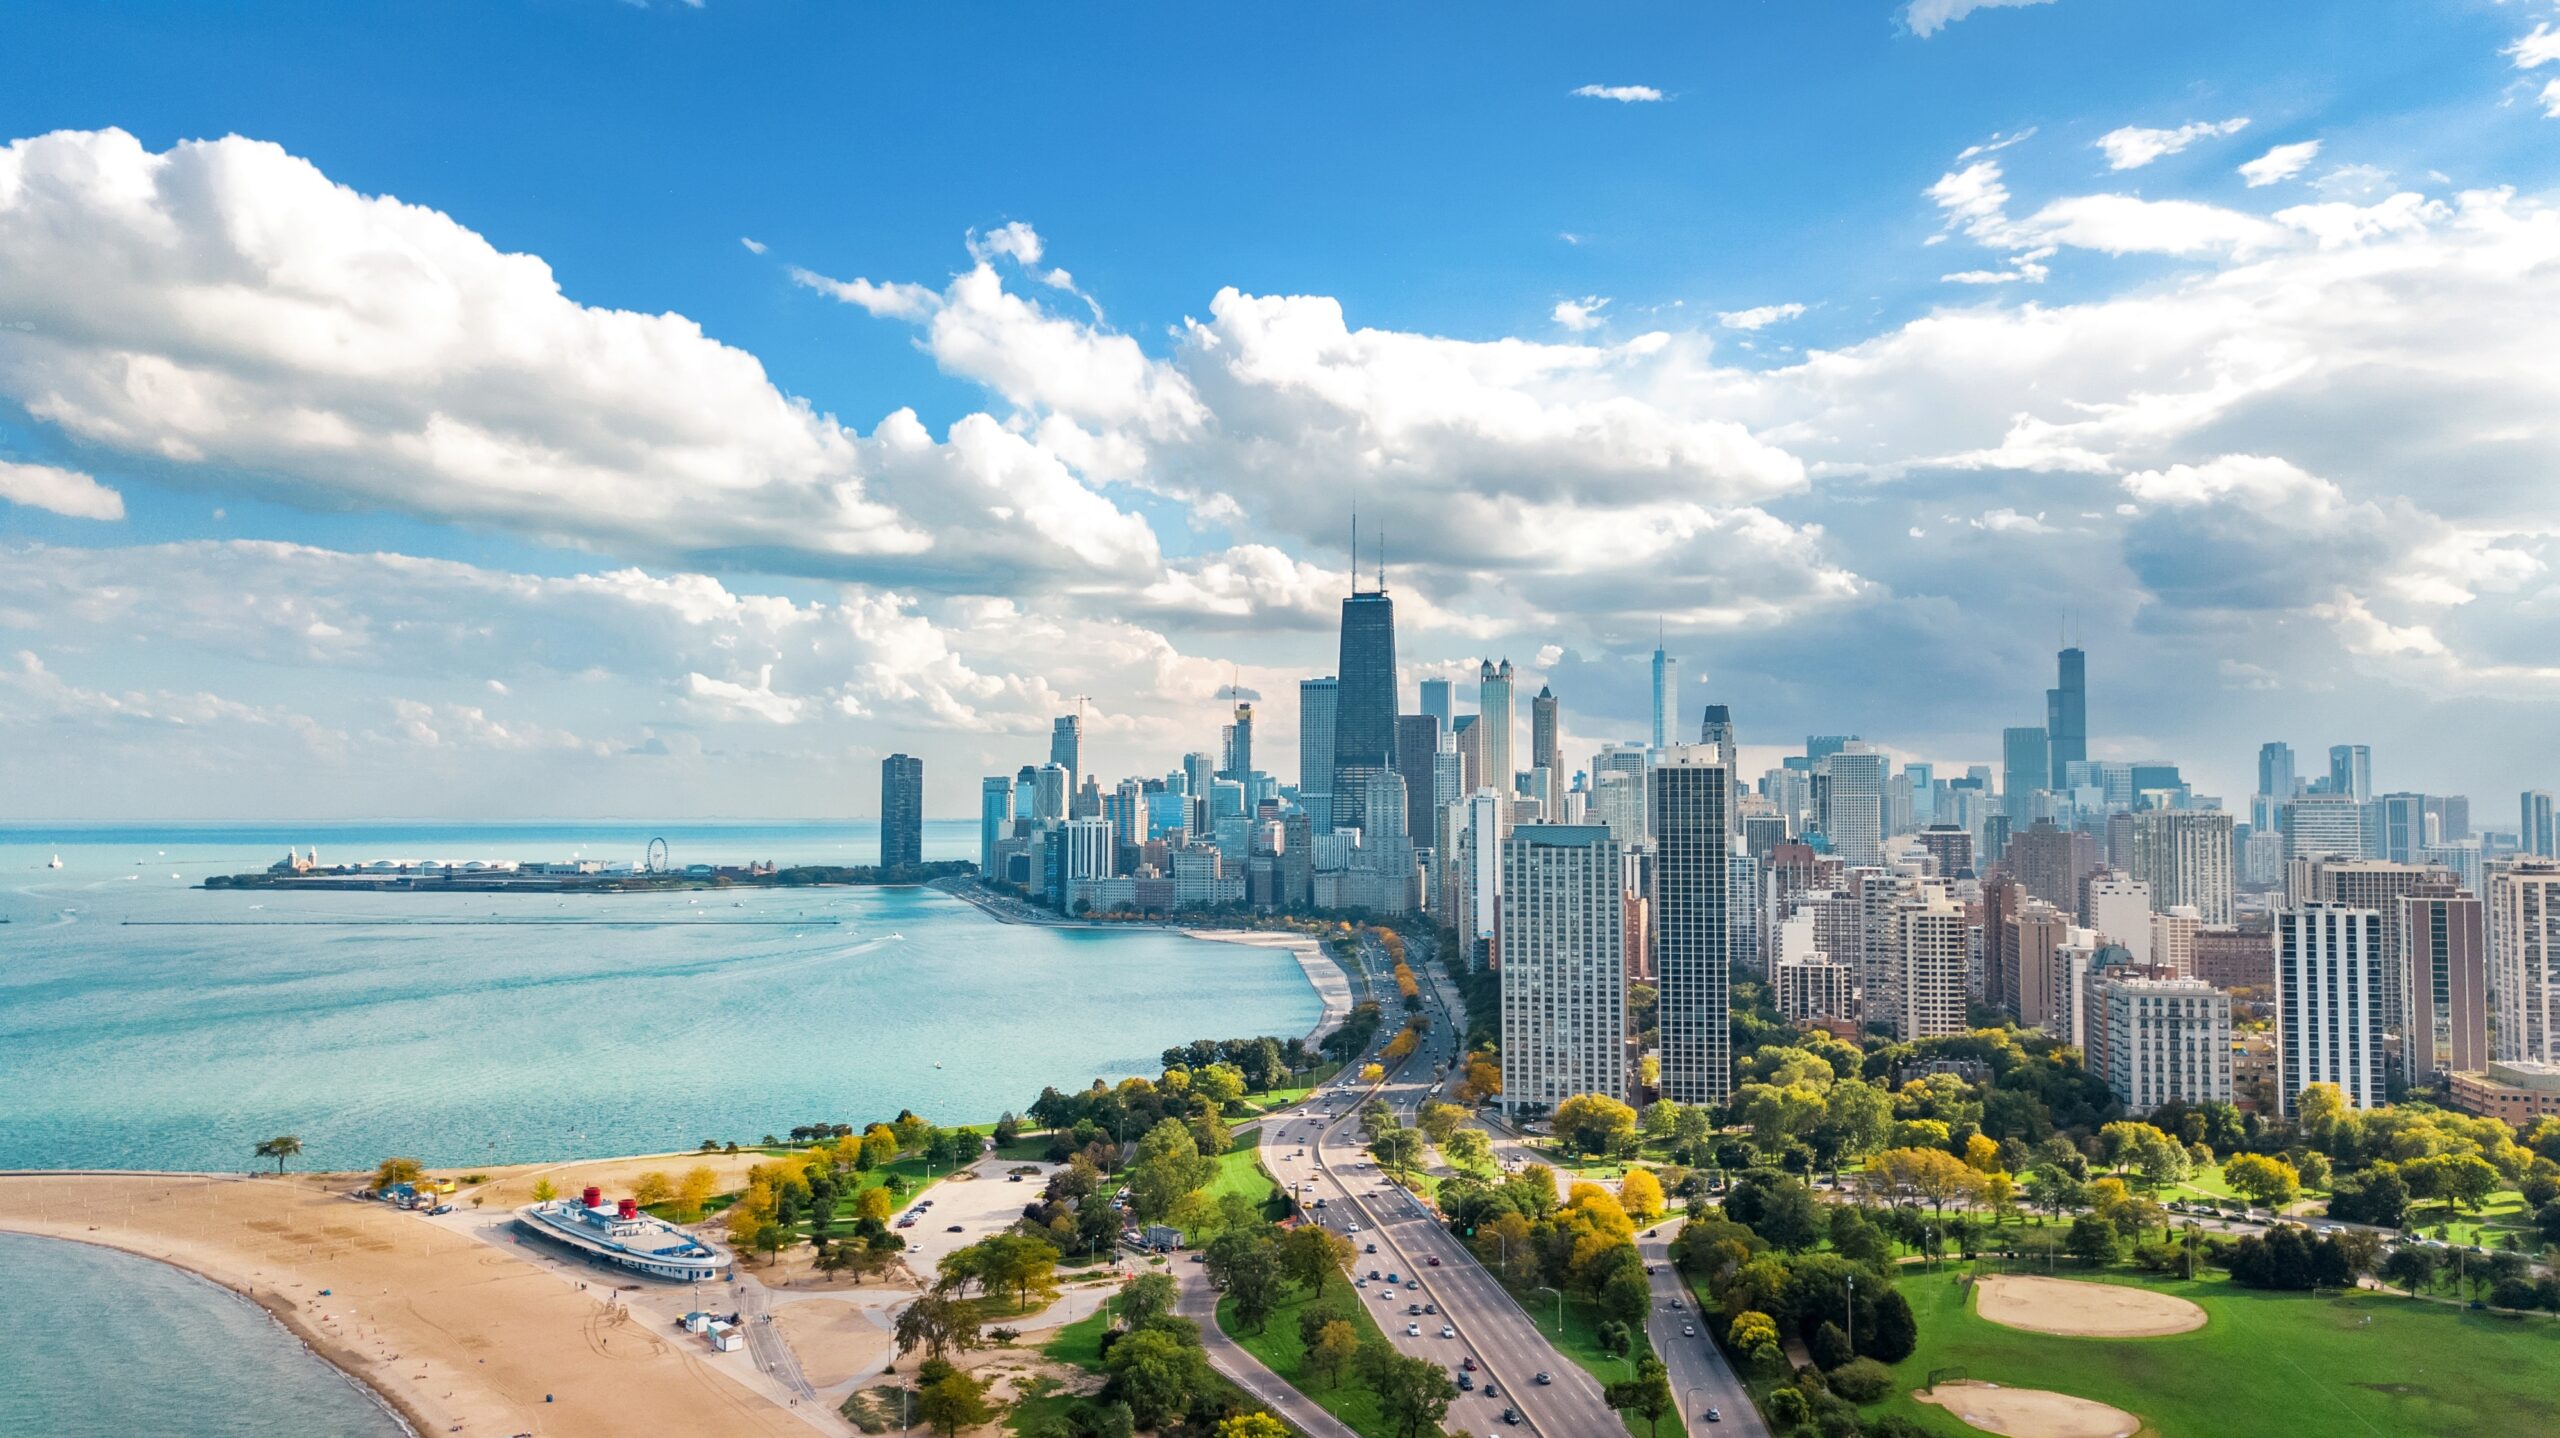 The National Black MBA Association Takes Over Chicago For Its 43rd Annual Conference